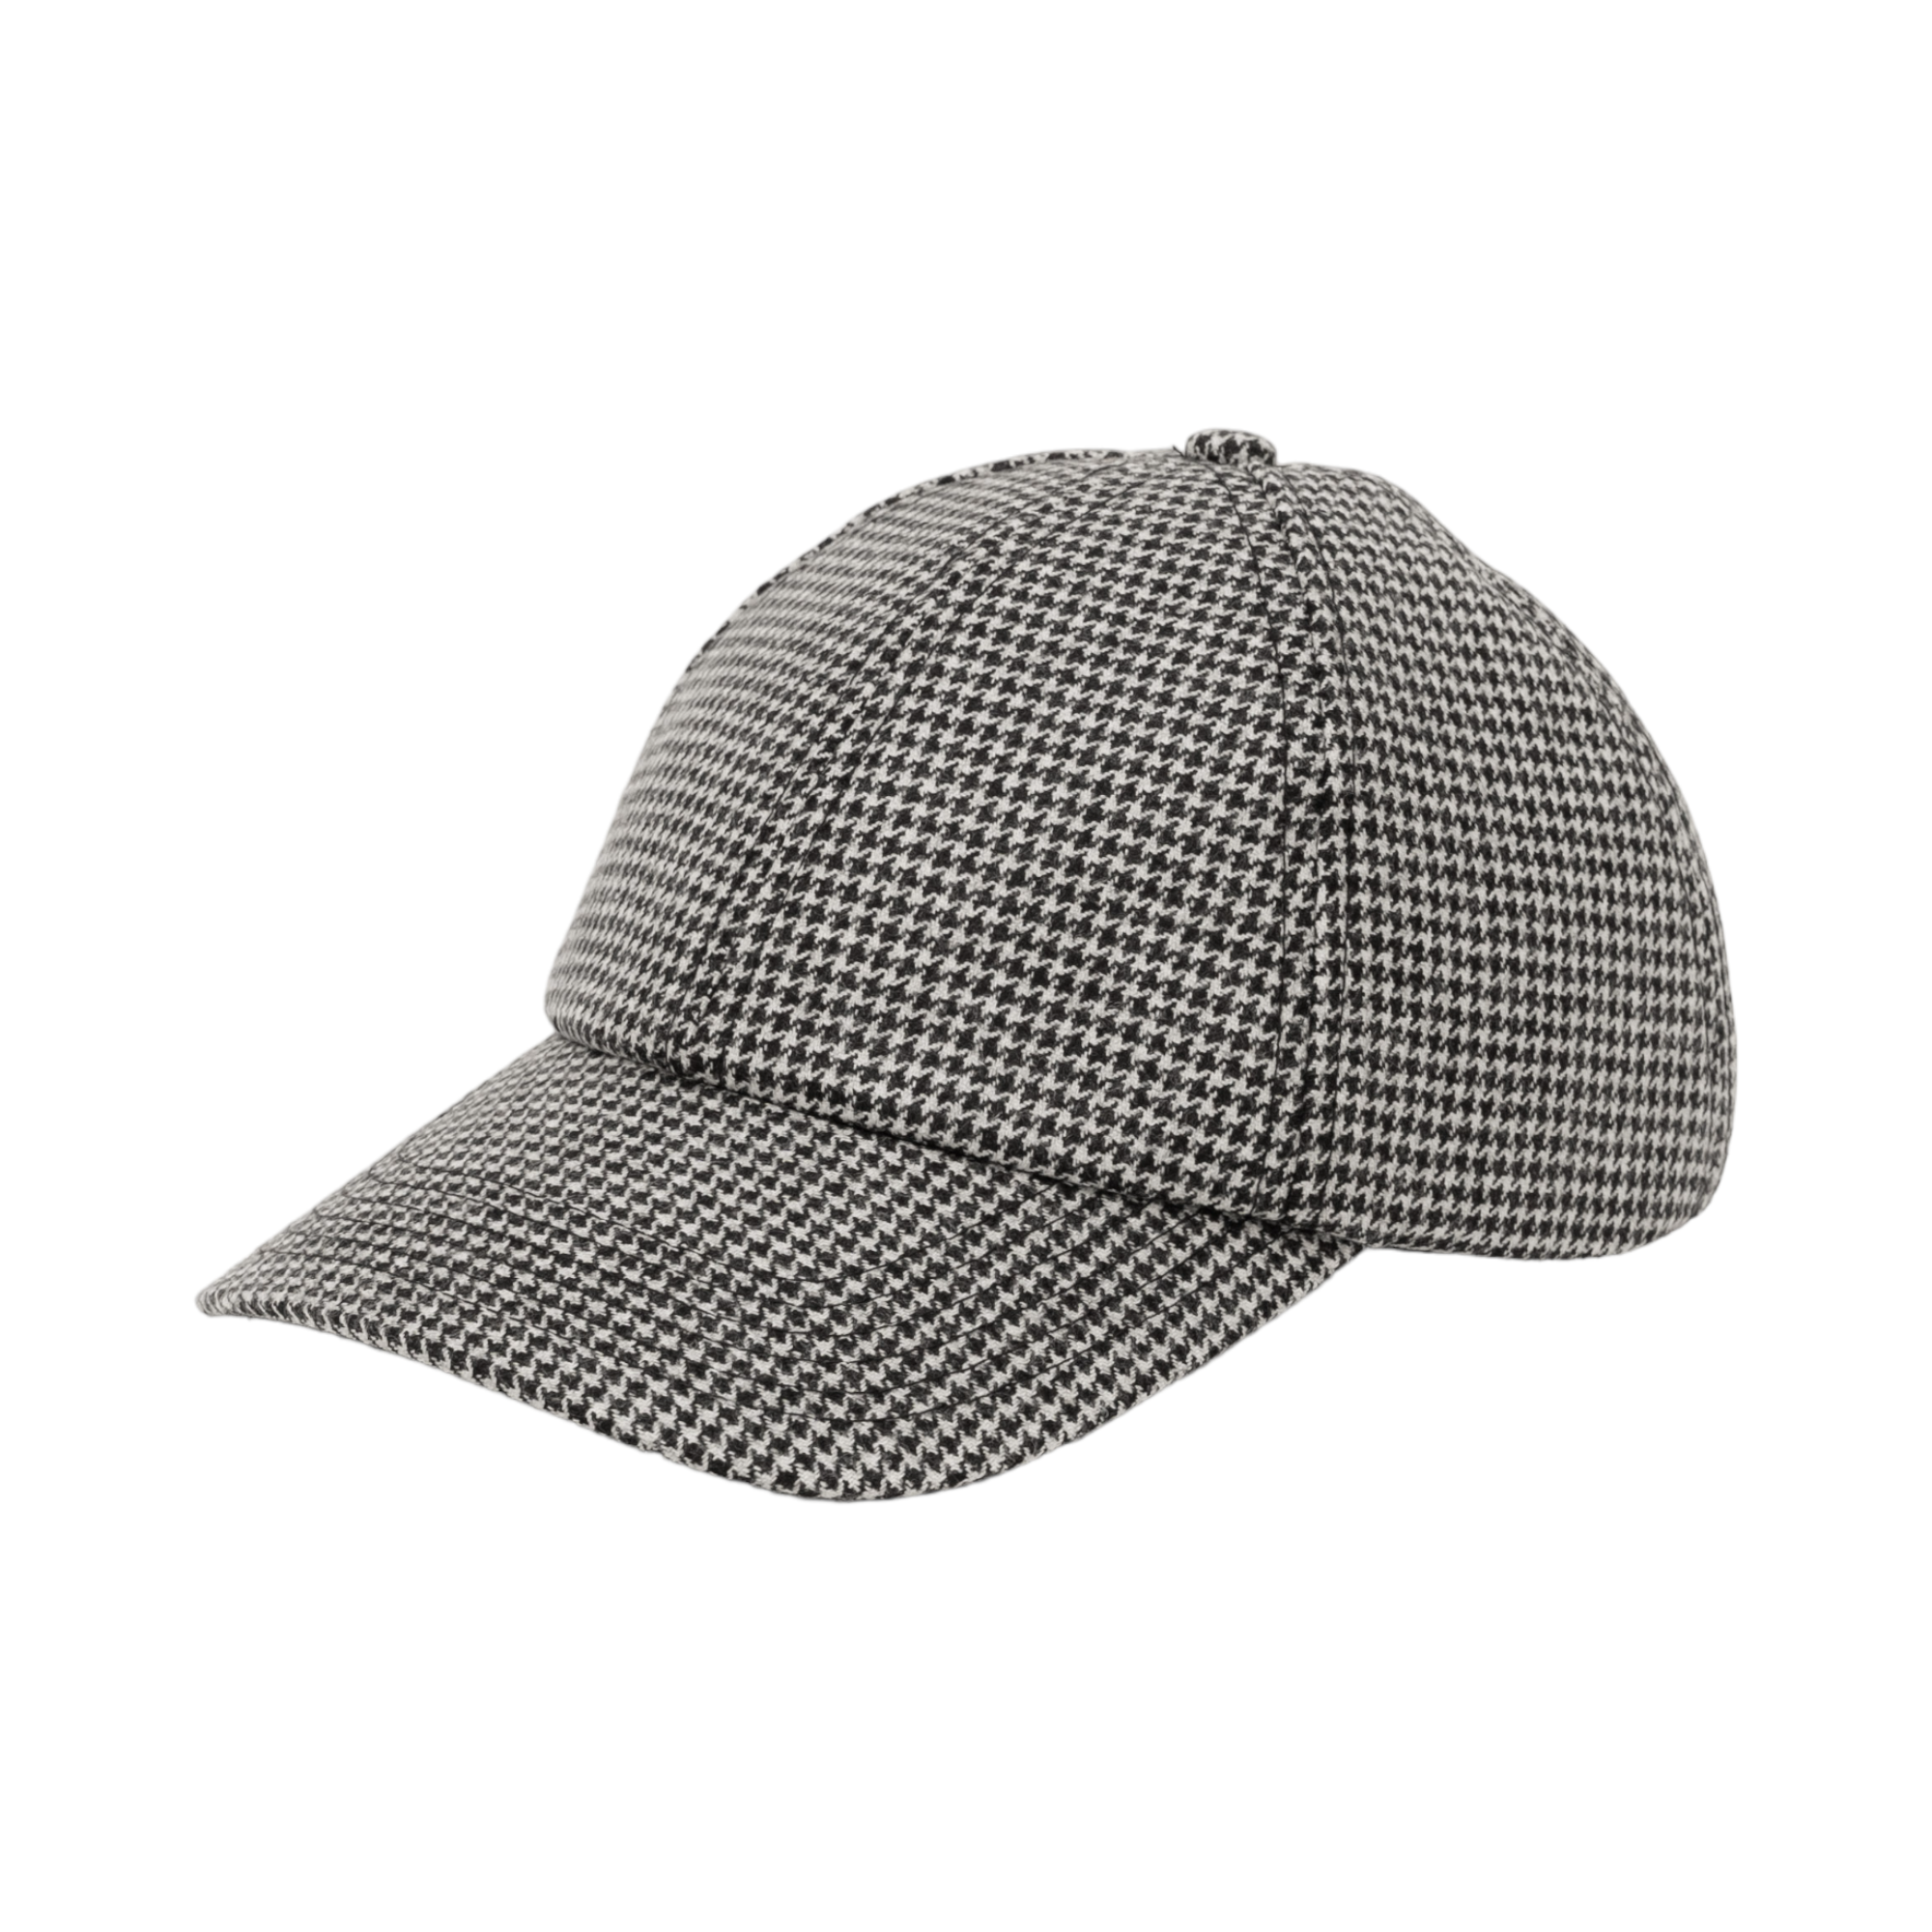 Vandre wool houndstooth hat front view